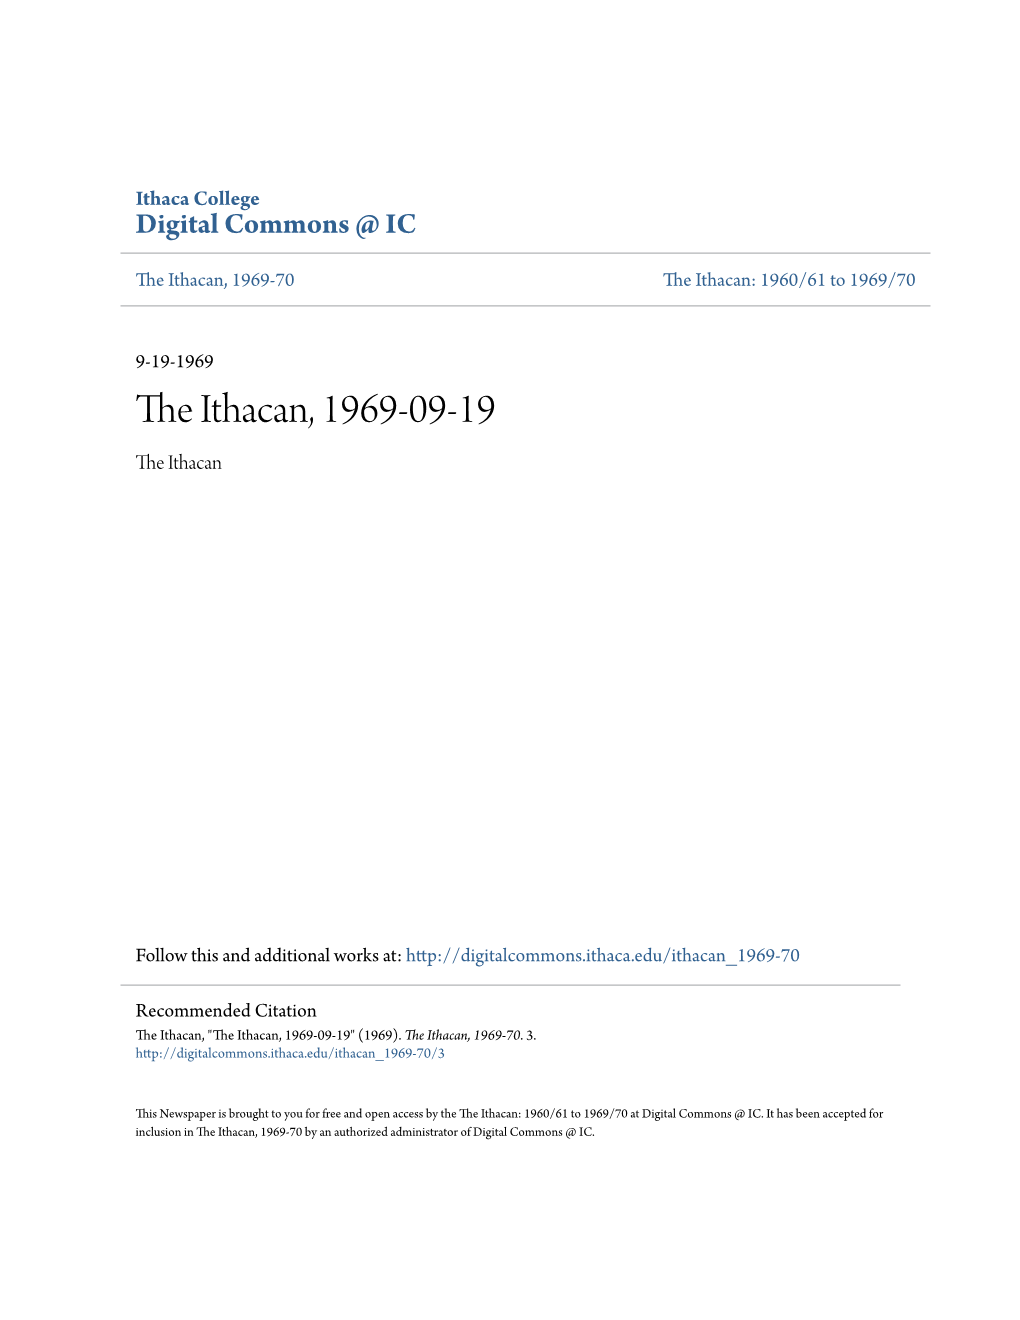 The Ithacan, 1969-09-19